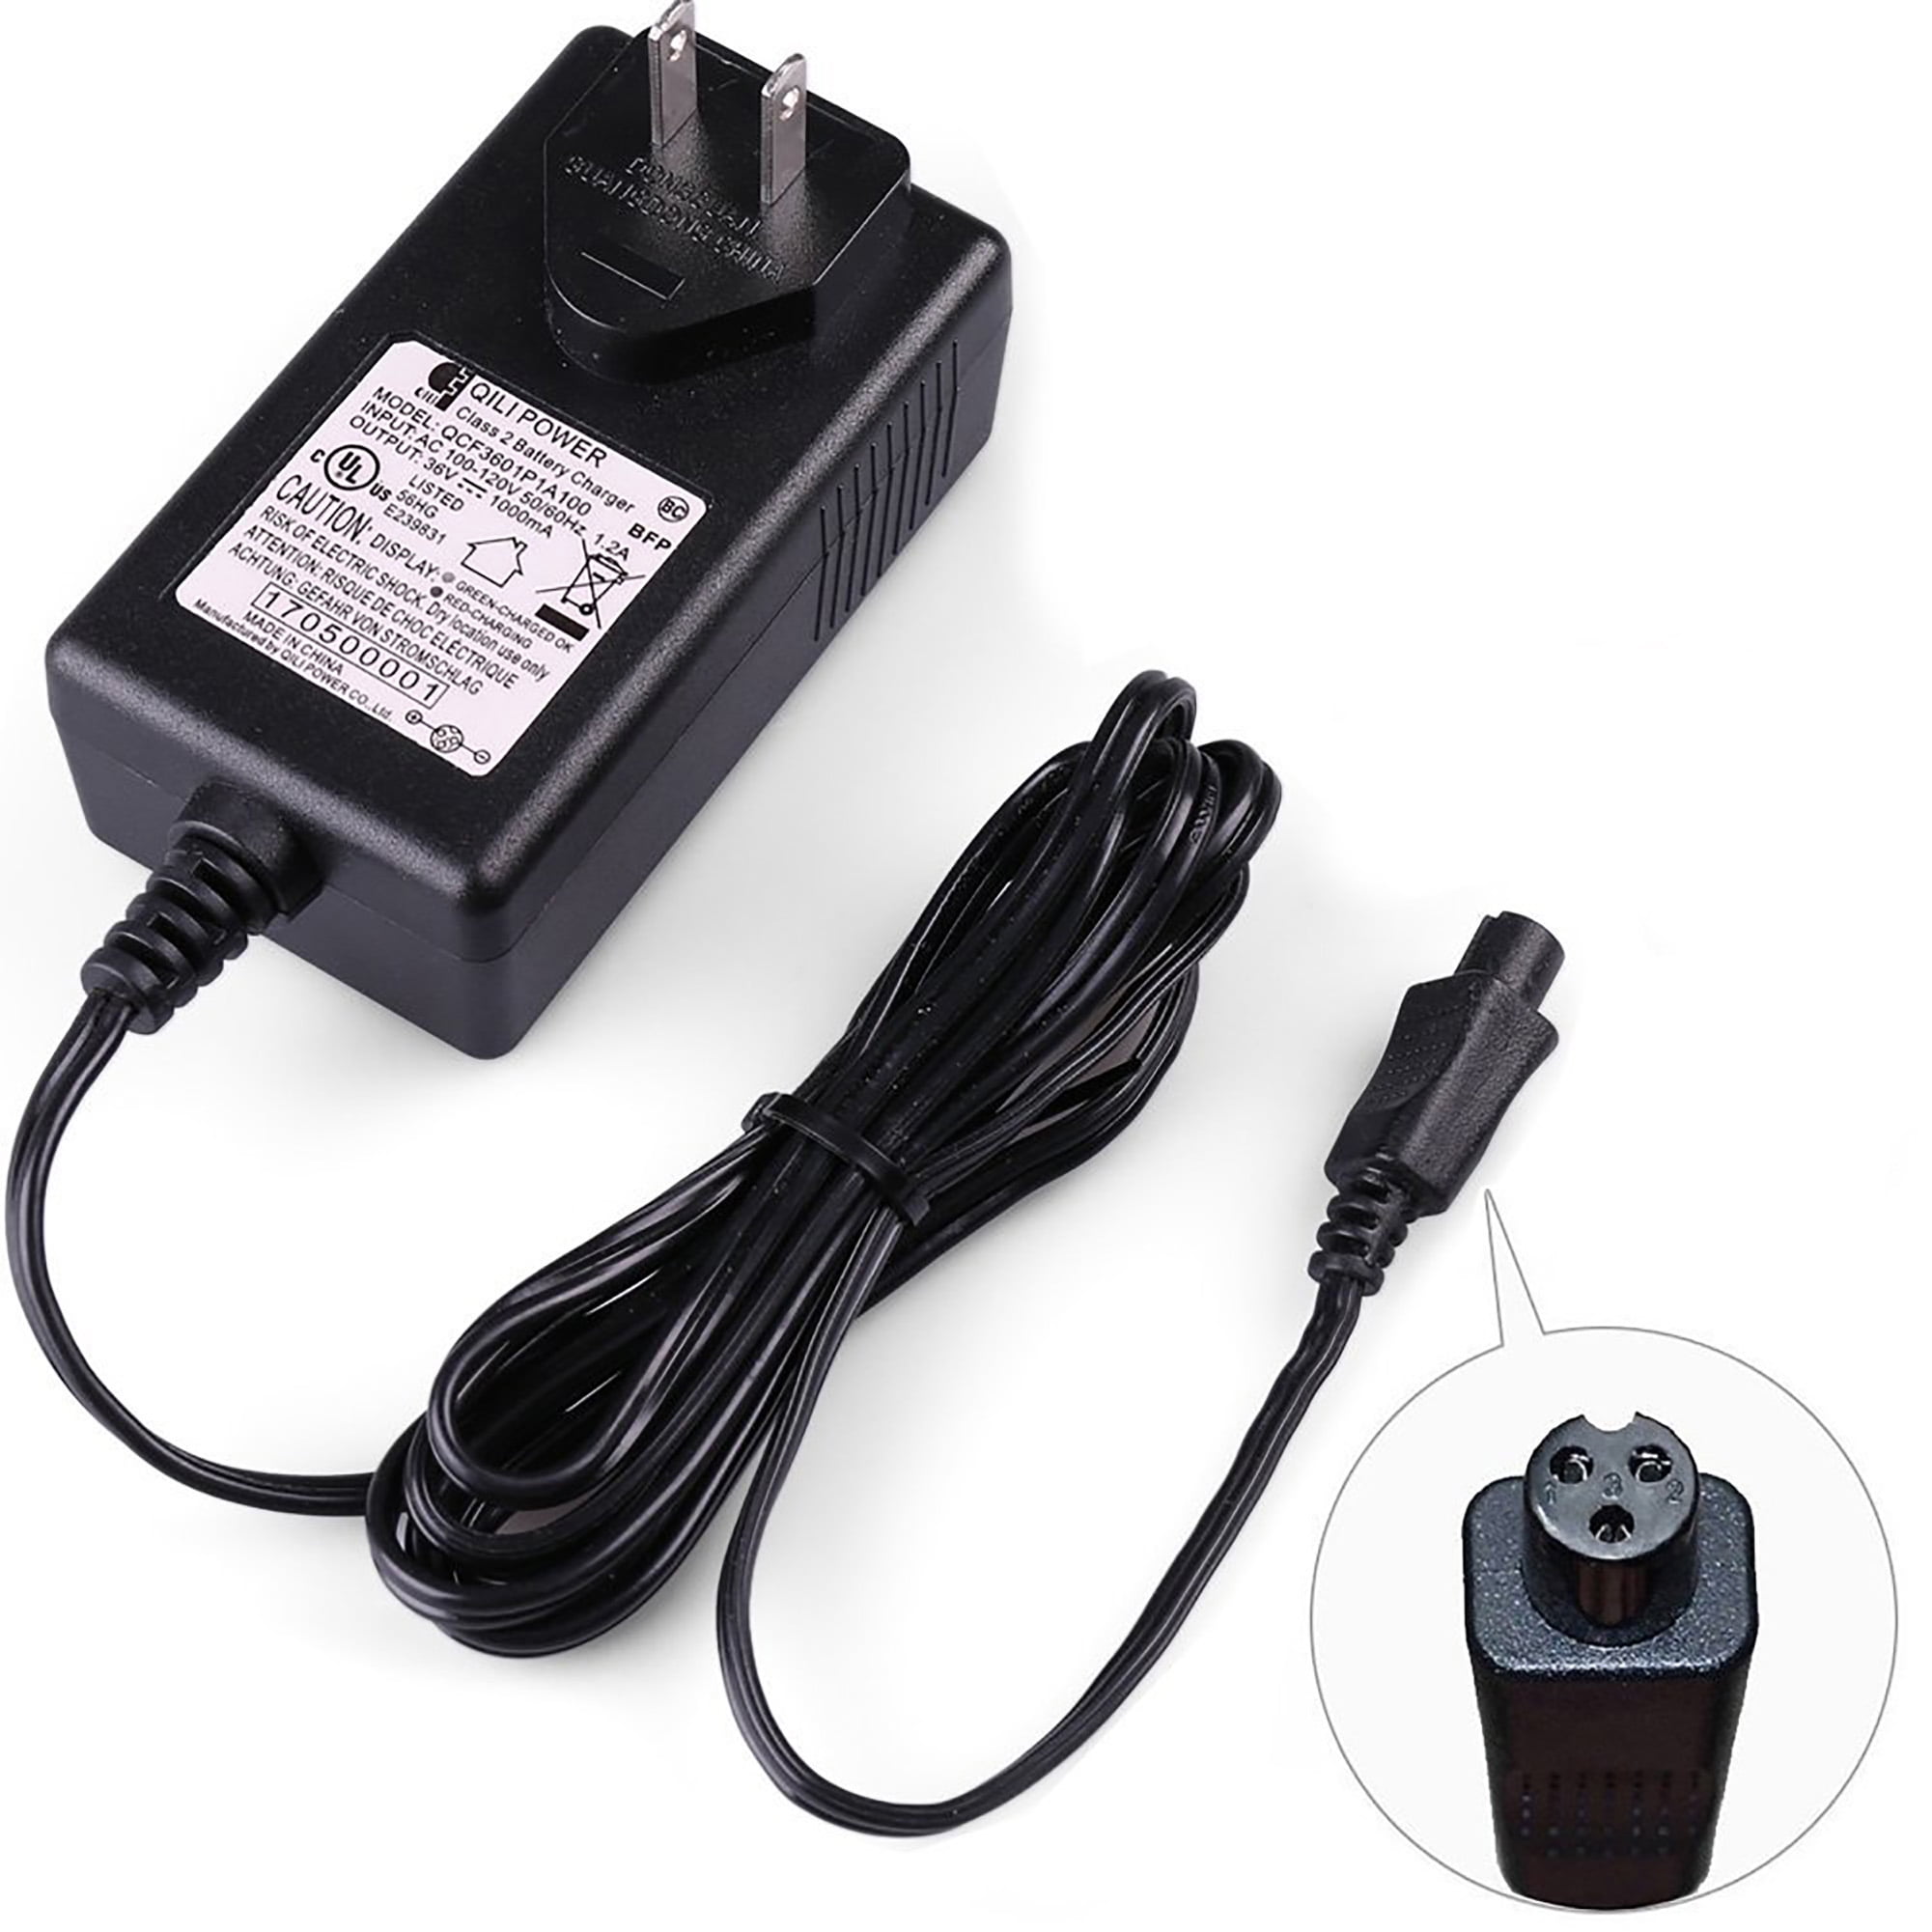 42v Power Adapter Battery Charger for 2 Wheel Self Balancing Scooter Hoverboard for sale online 